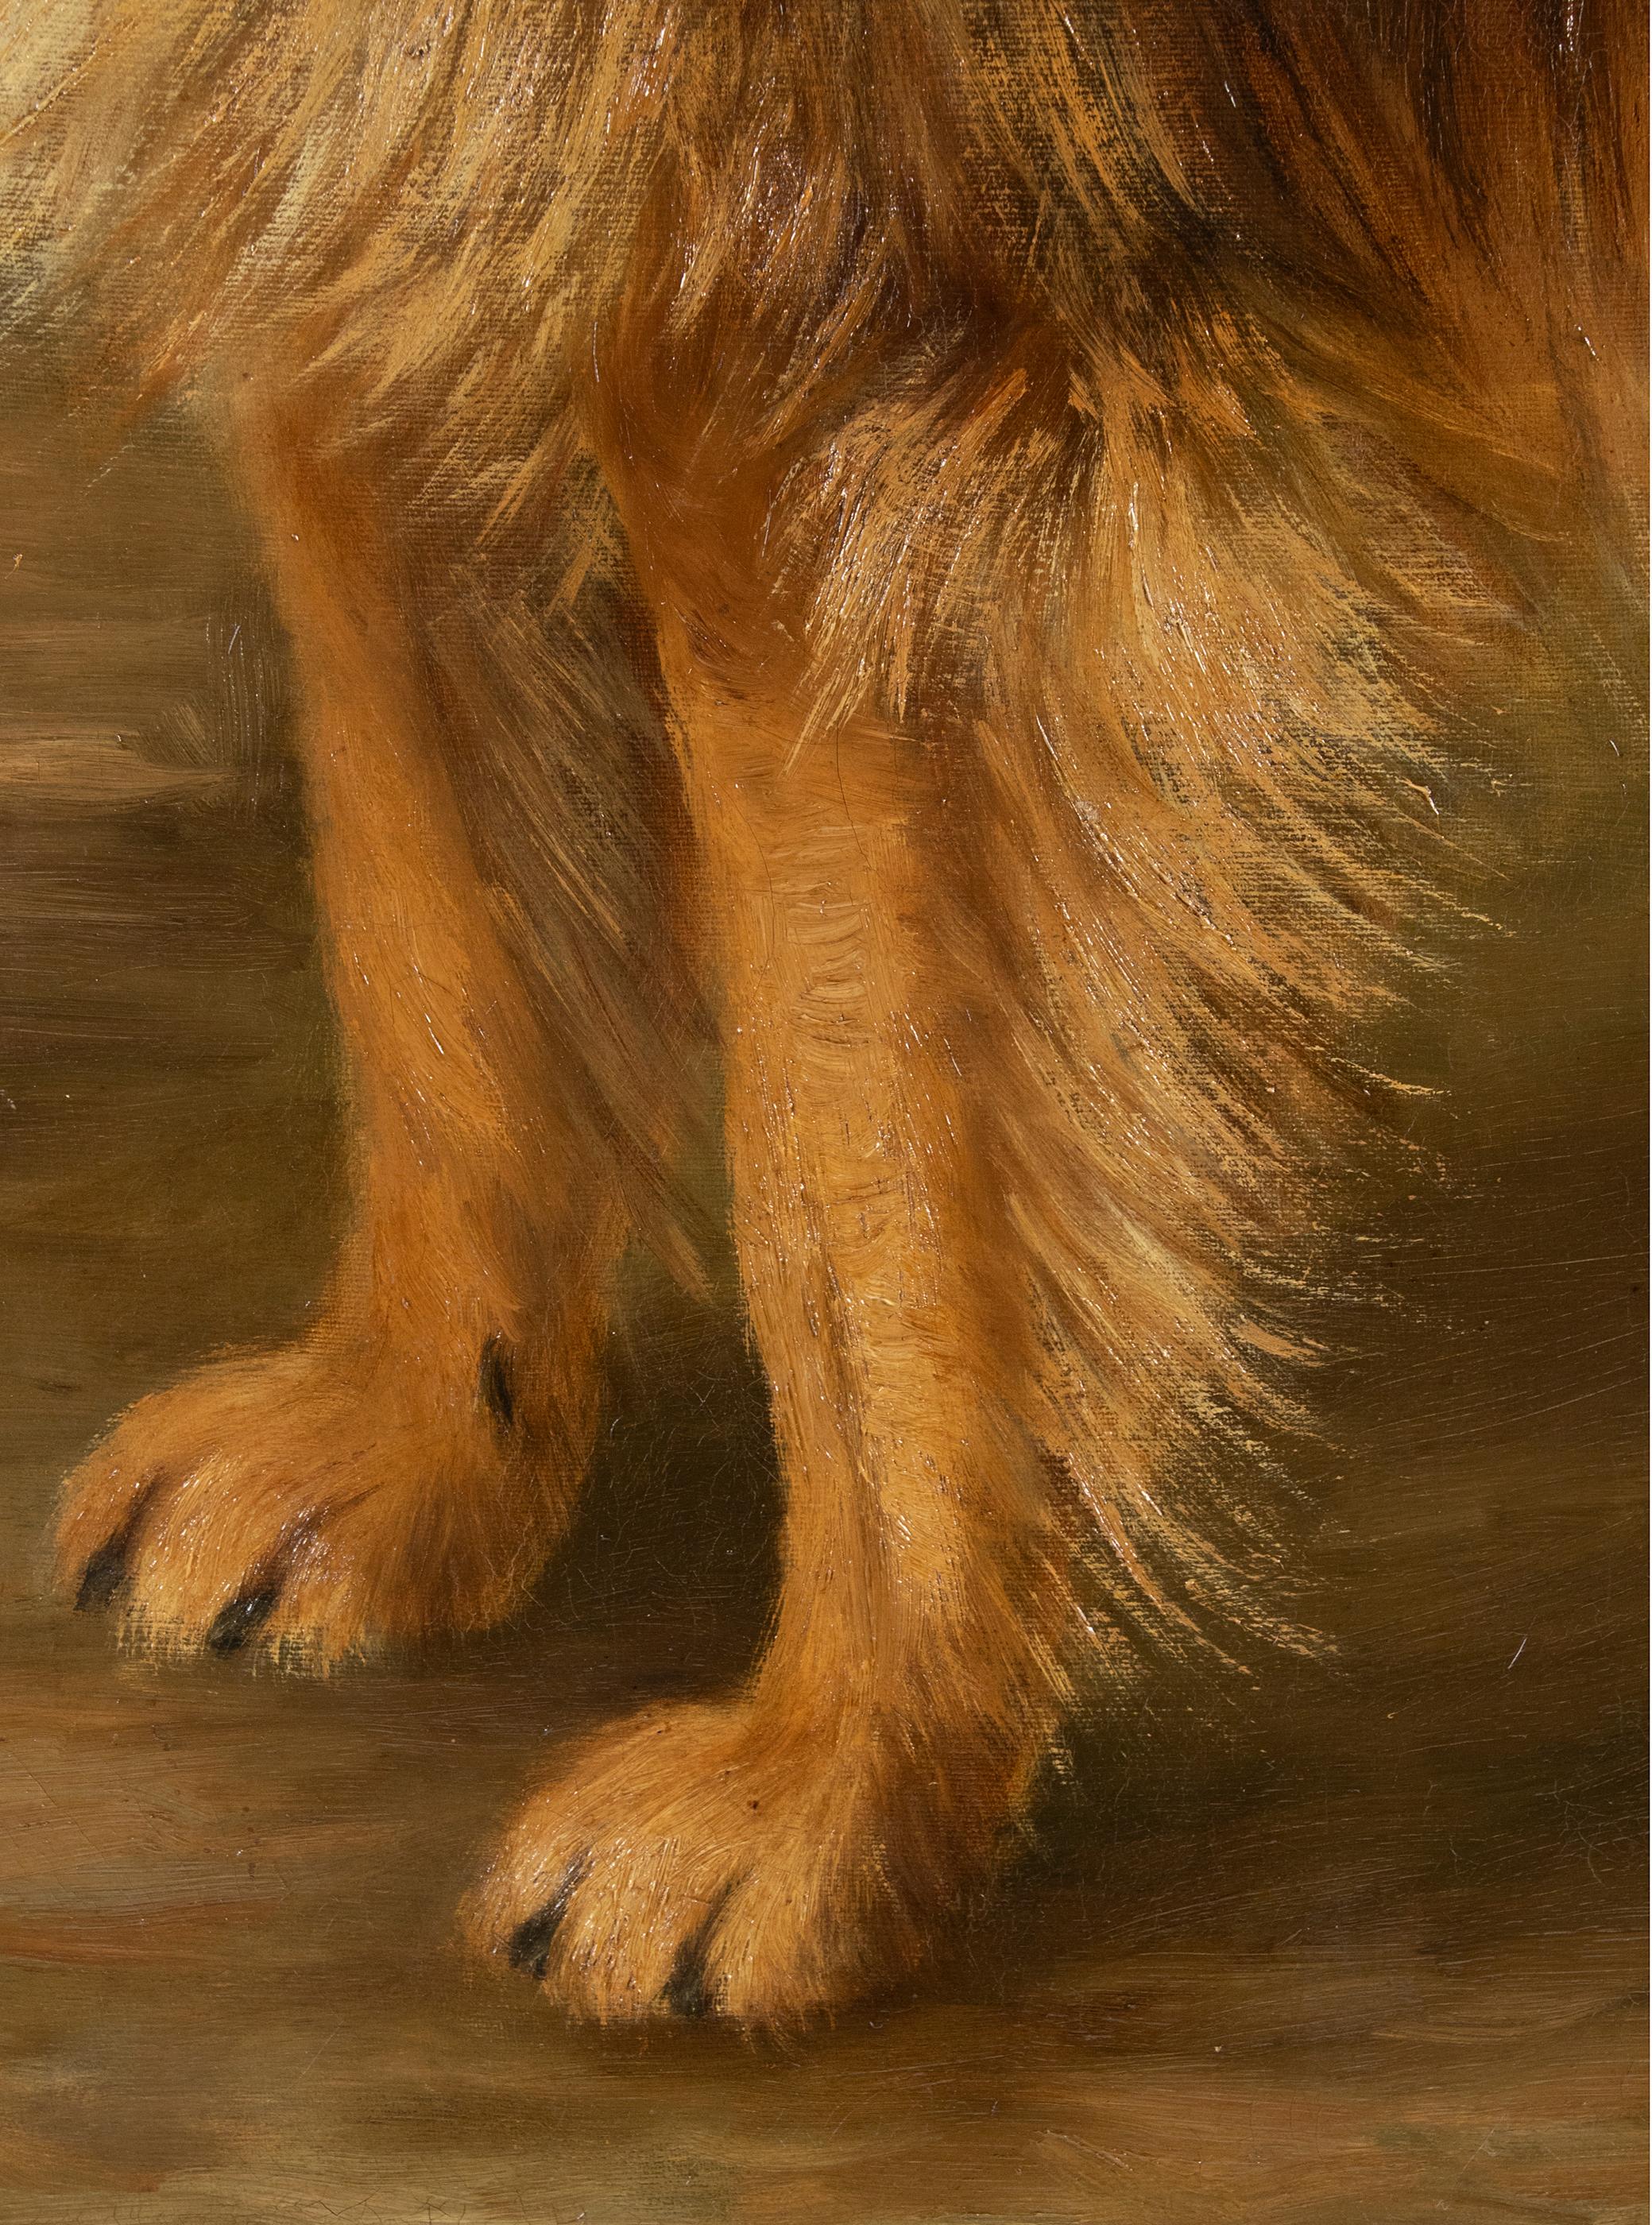 19th Century Antique Dog Painting of a Scottish Collie by Zélia Klerx Oil on Canvas